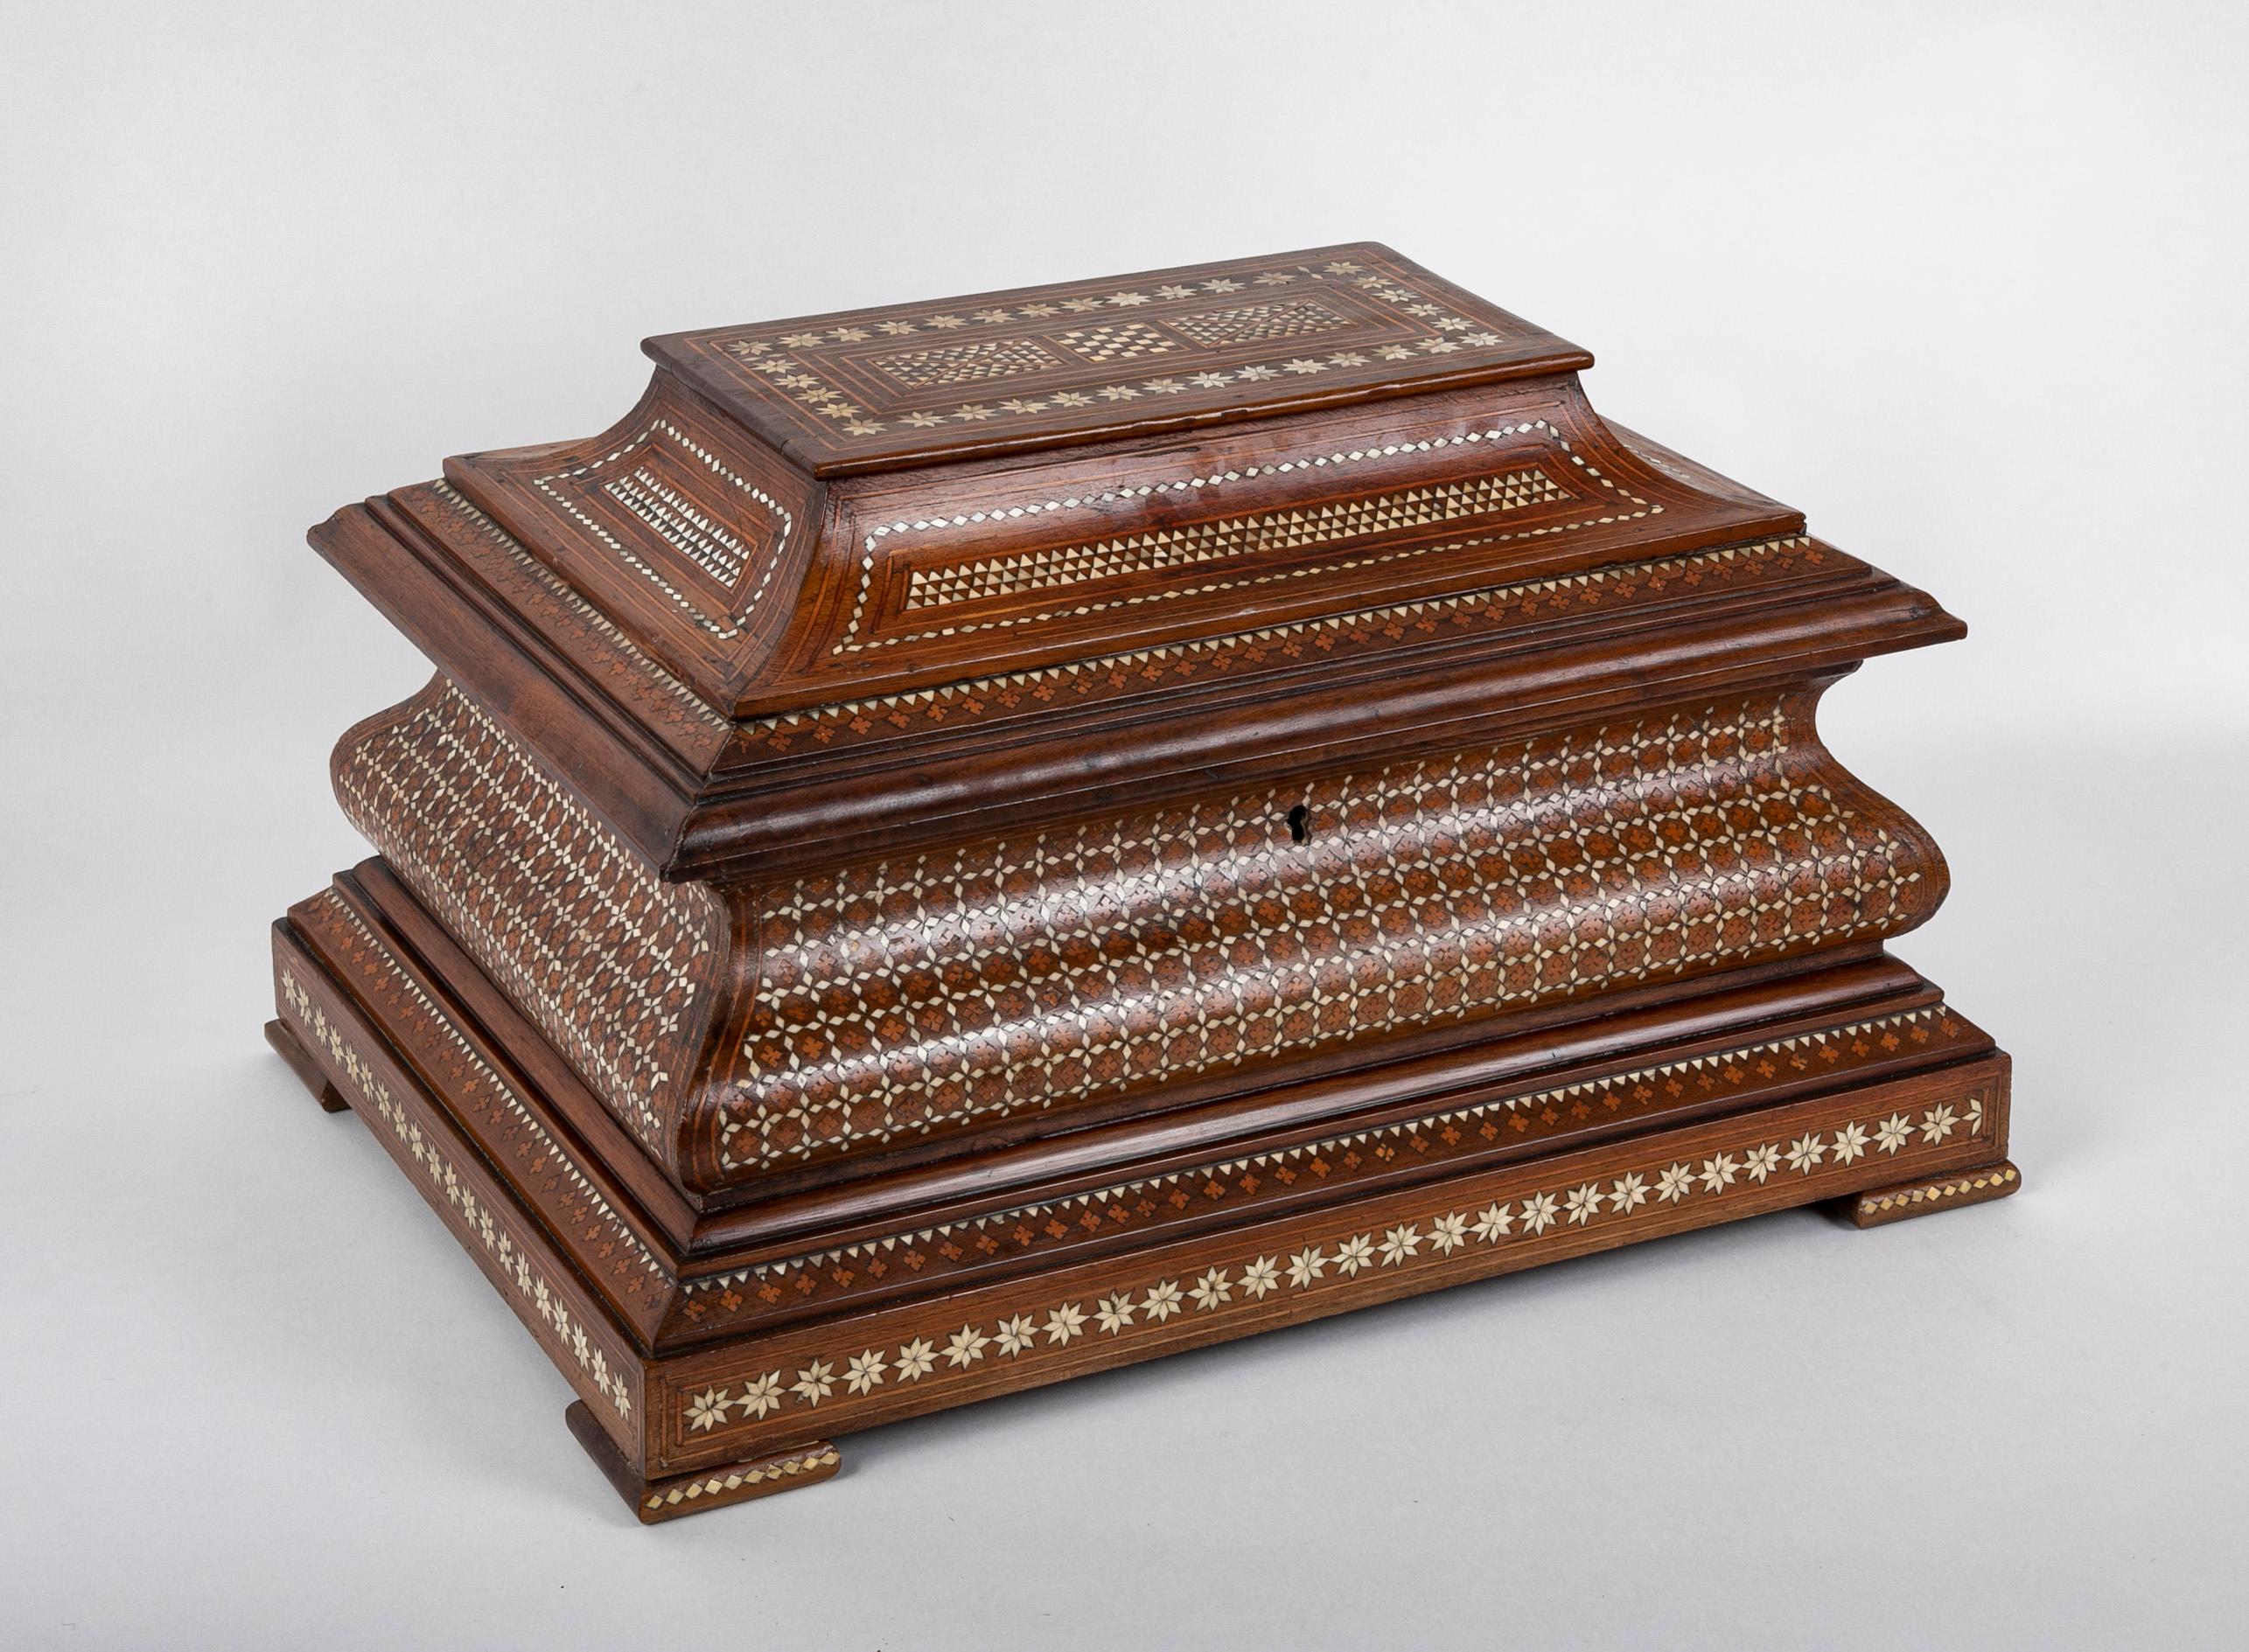 19th century Anglo-Indian hardwood casket with bone inlay.  India.